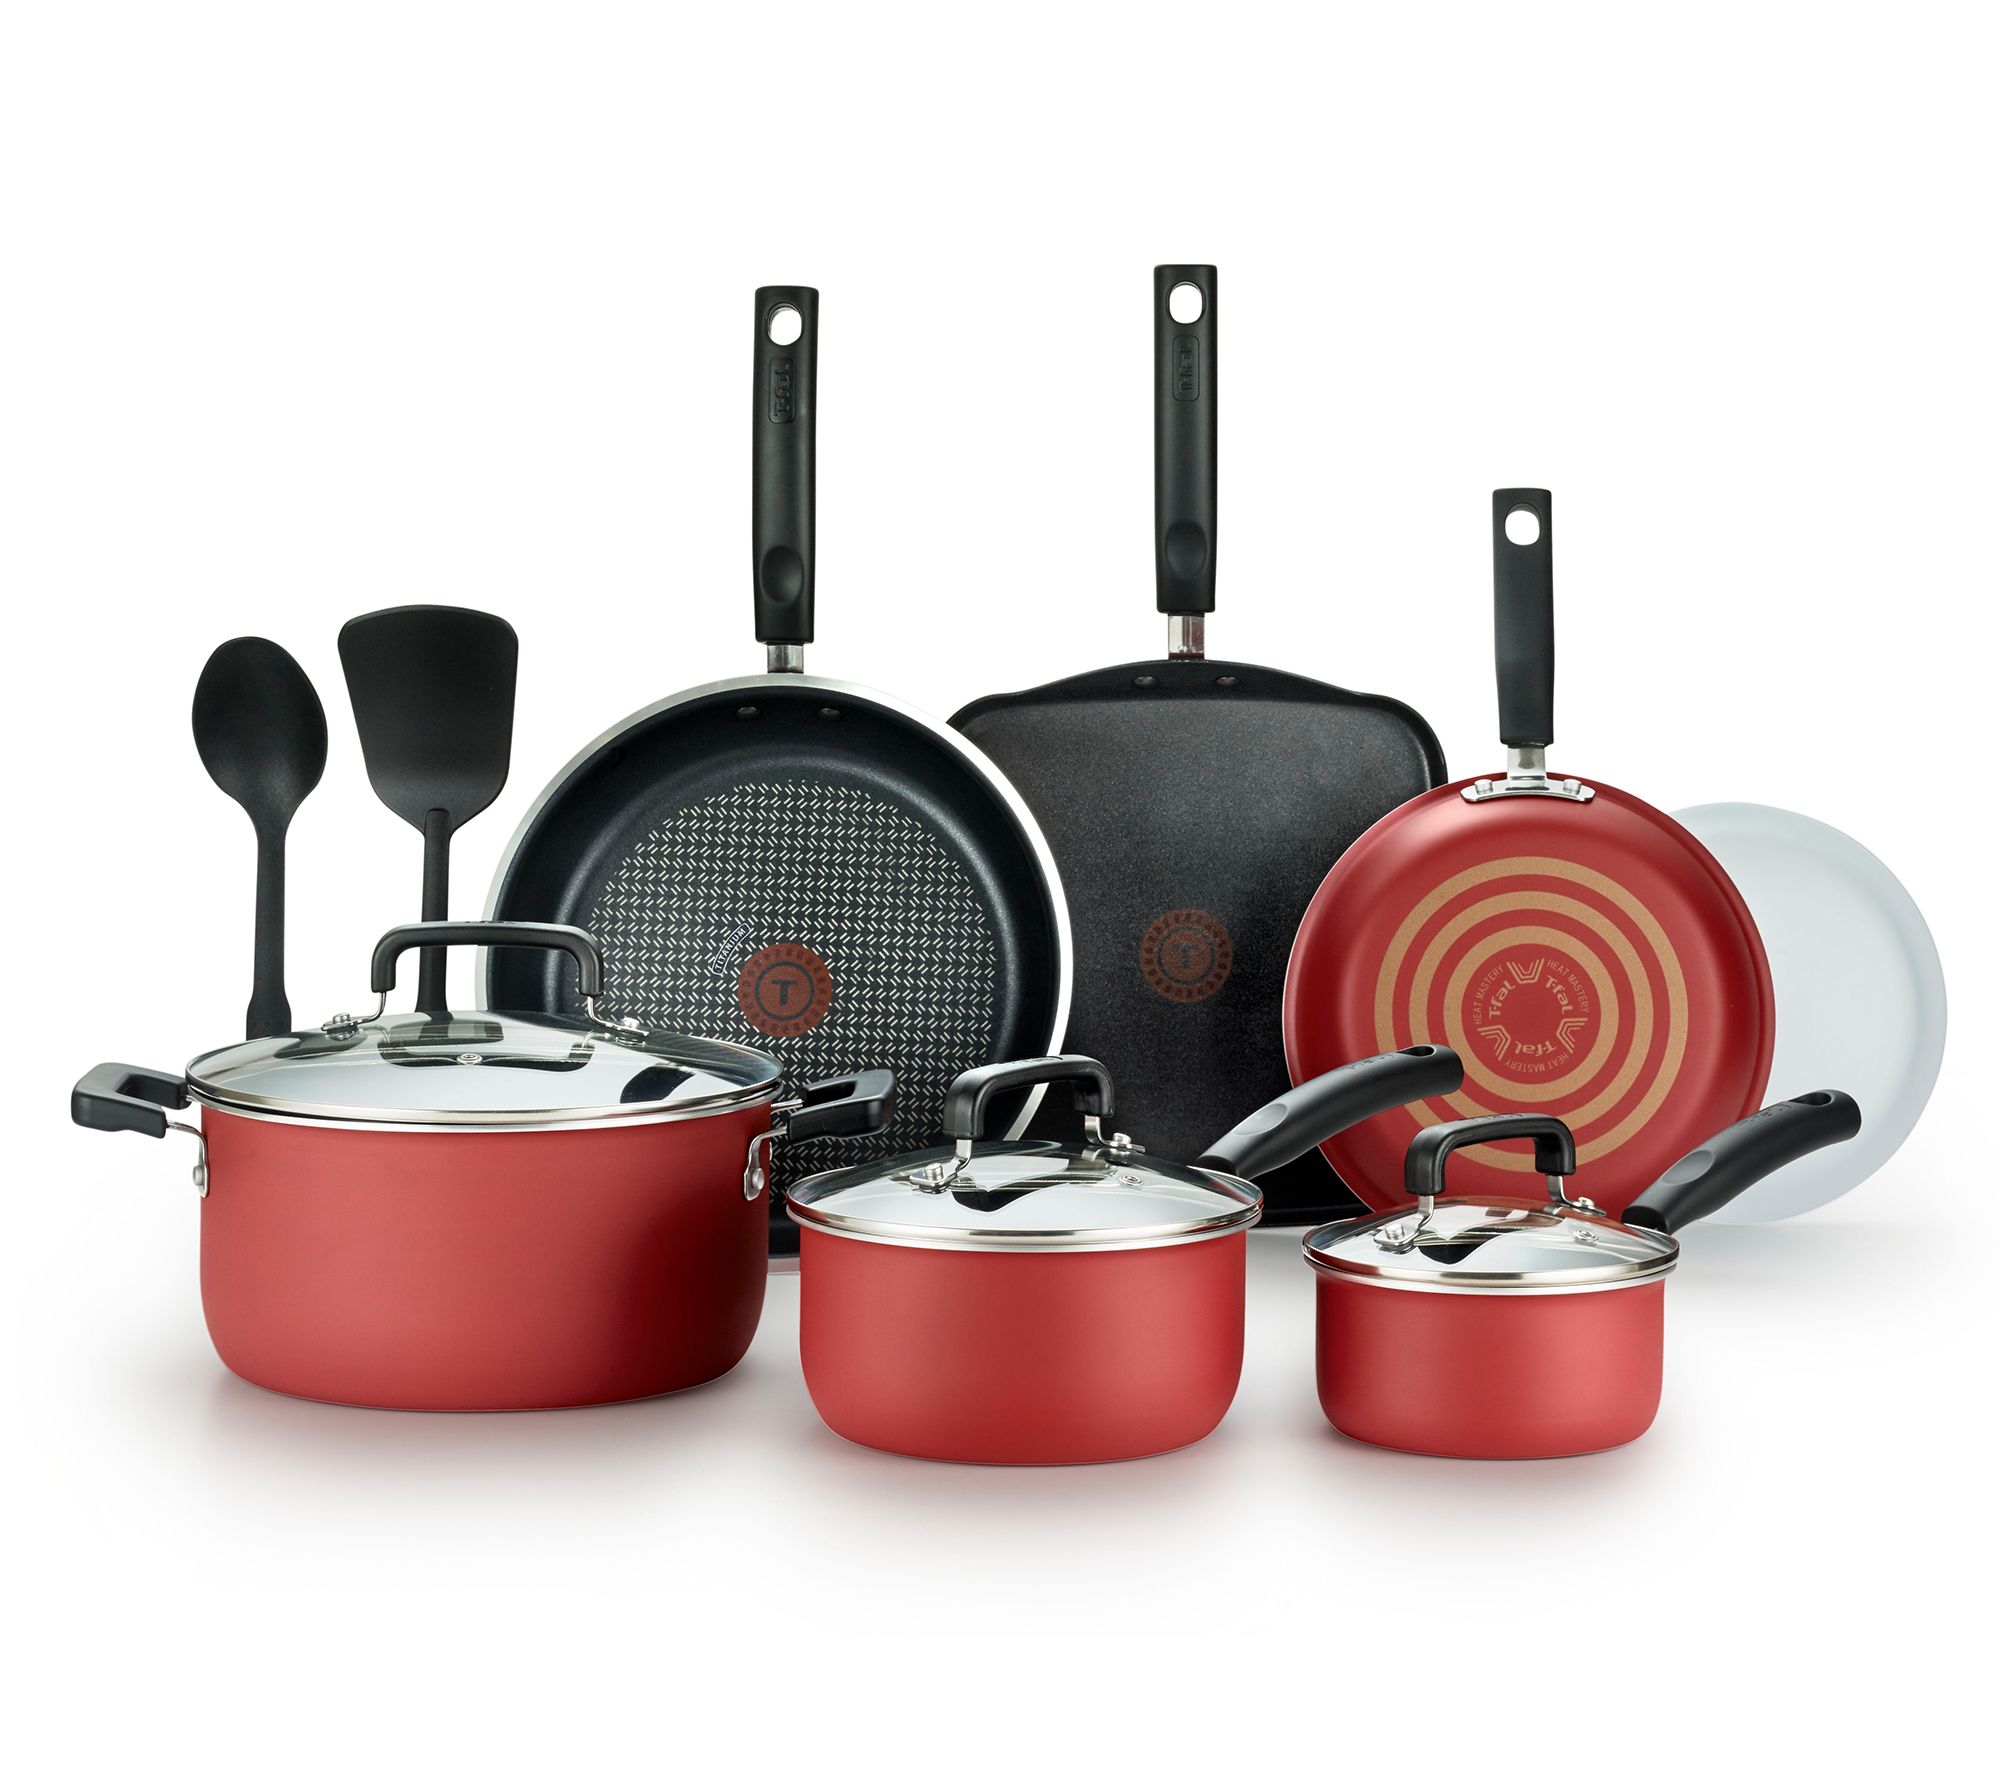 TEFAL Signature Nonstick Cookware Set 12 Piece Pots and Pans,Dishwasher  Safe Red